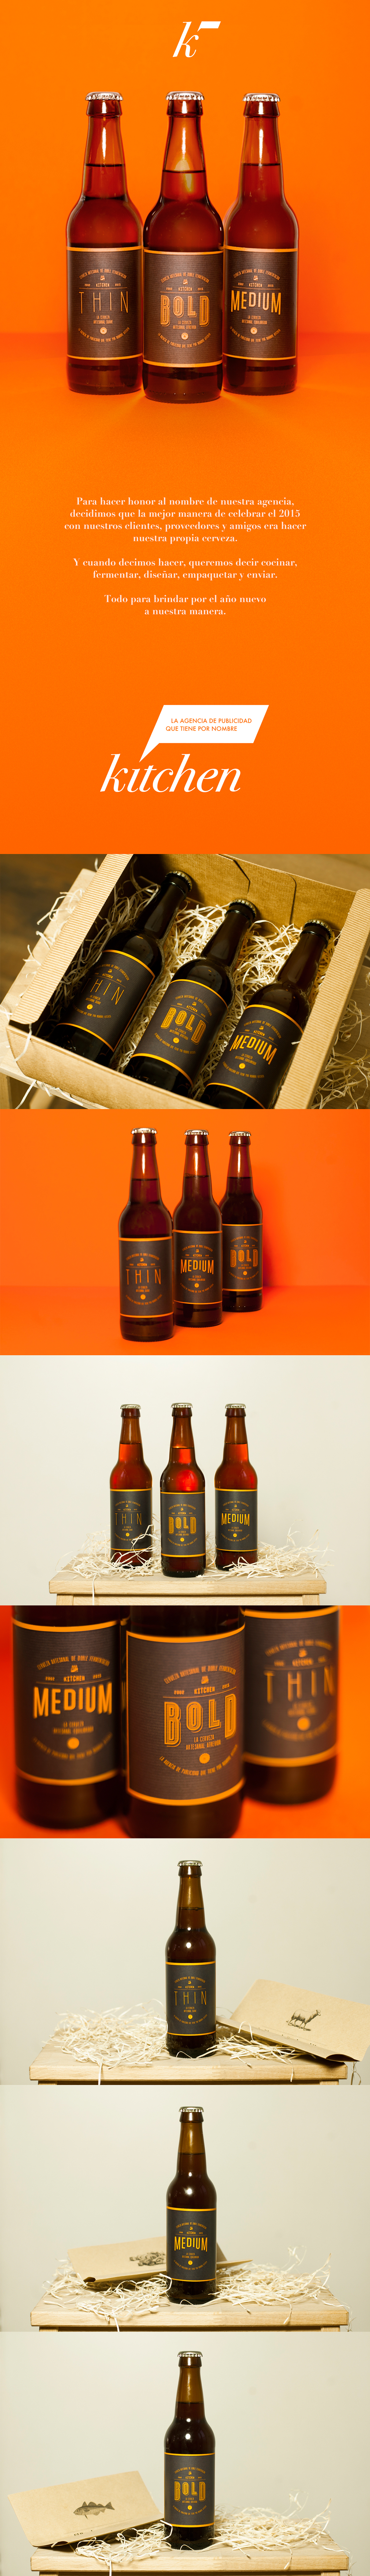 beer label Label design Christmas promo kitchen agency xmas limited edition cerveza diseño gift